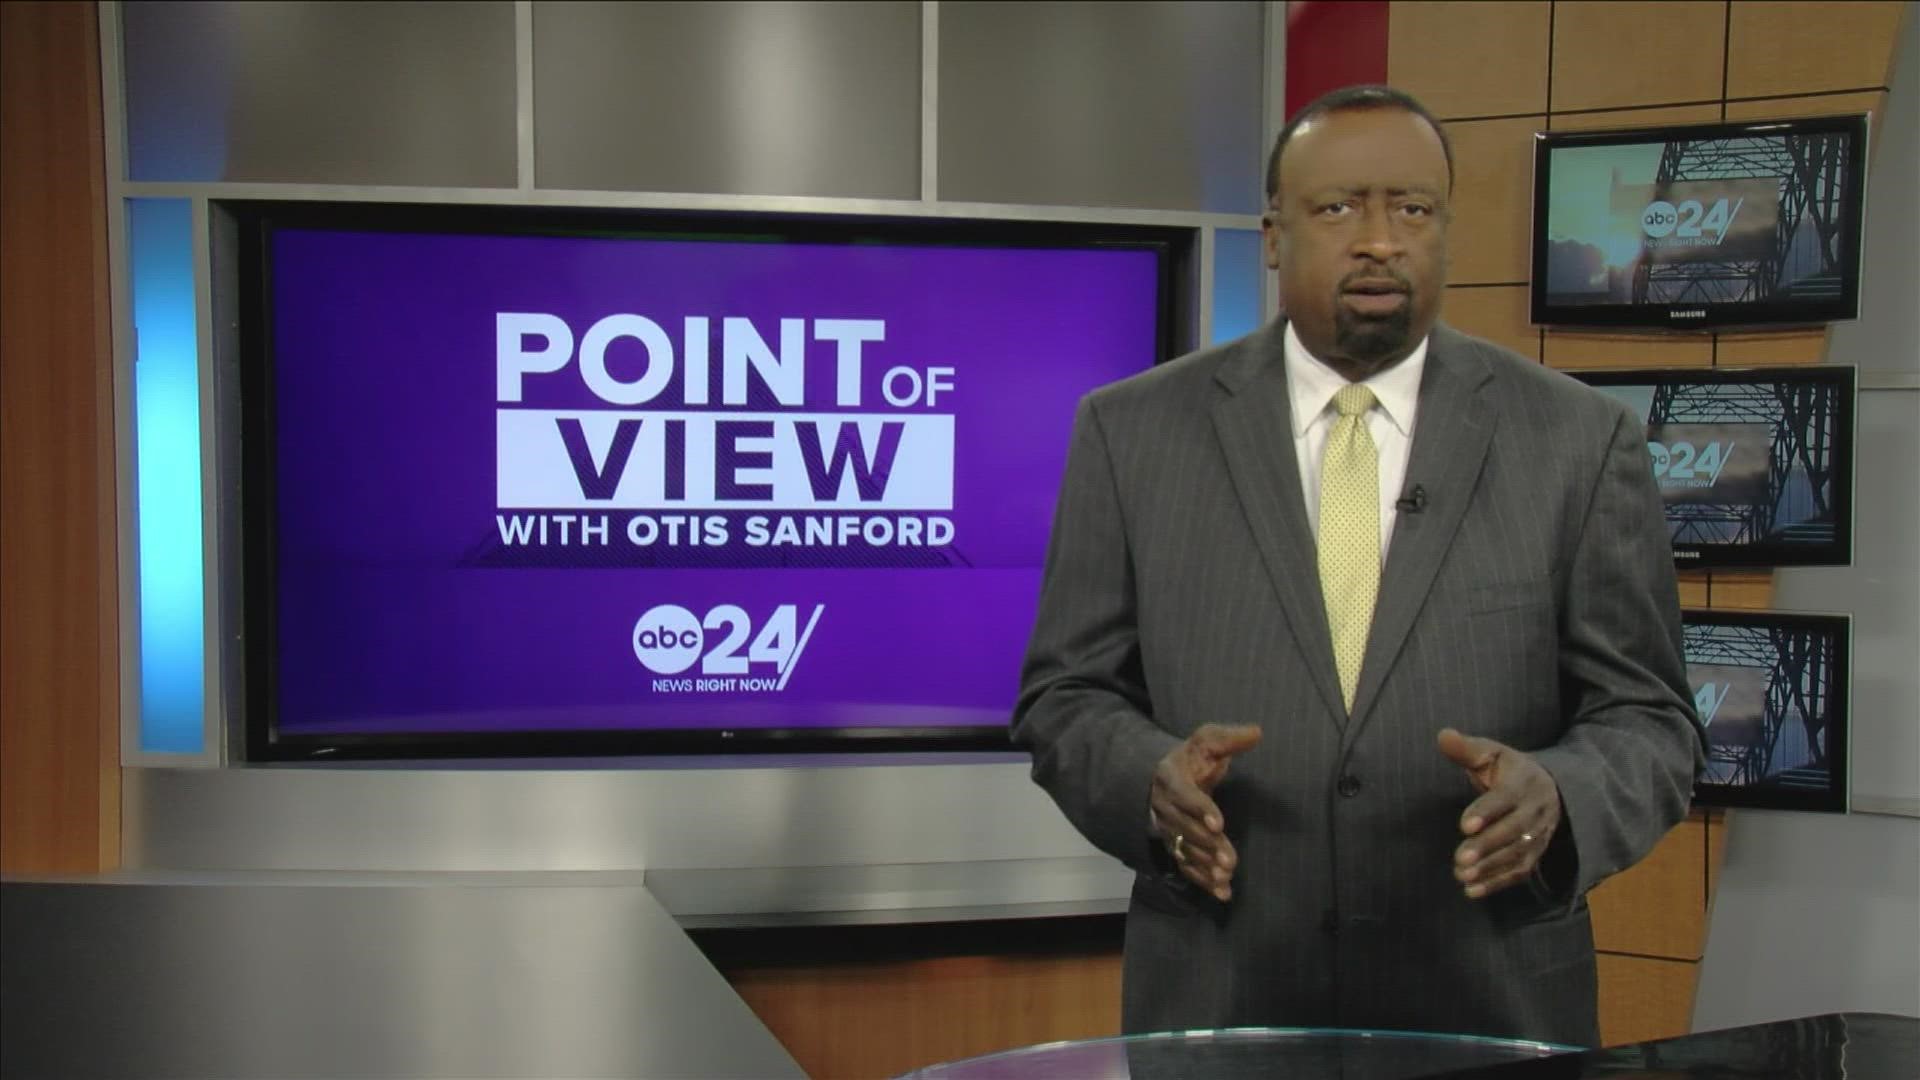 ABC 24 political analyst and commentator Otis Sanford shared his point of view on the controversy over Memphis artist Tommy Kha’s work at the airport.